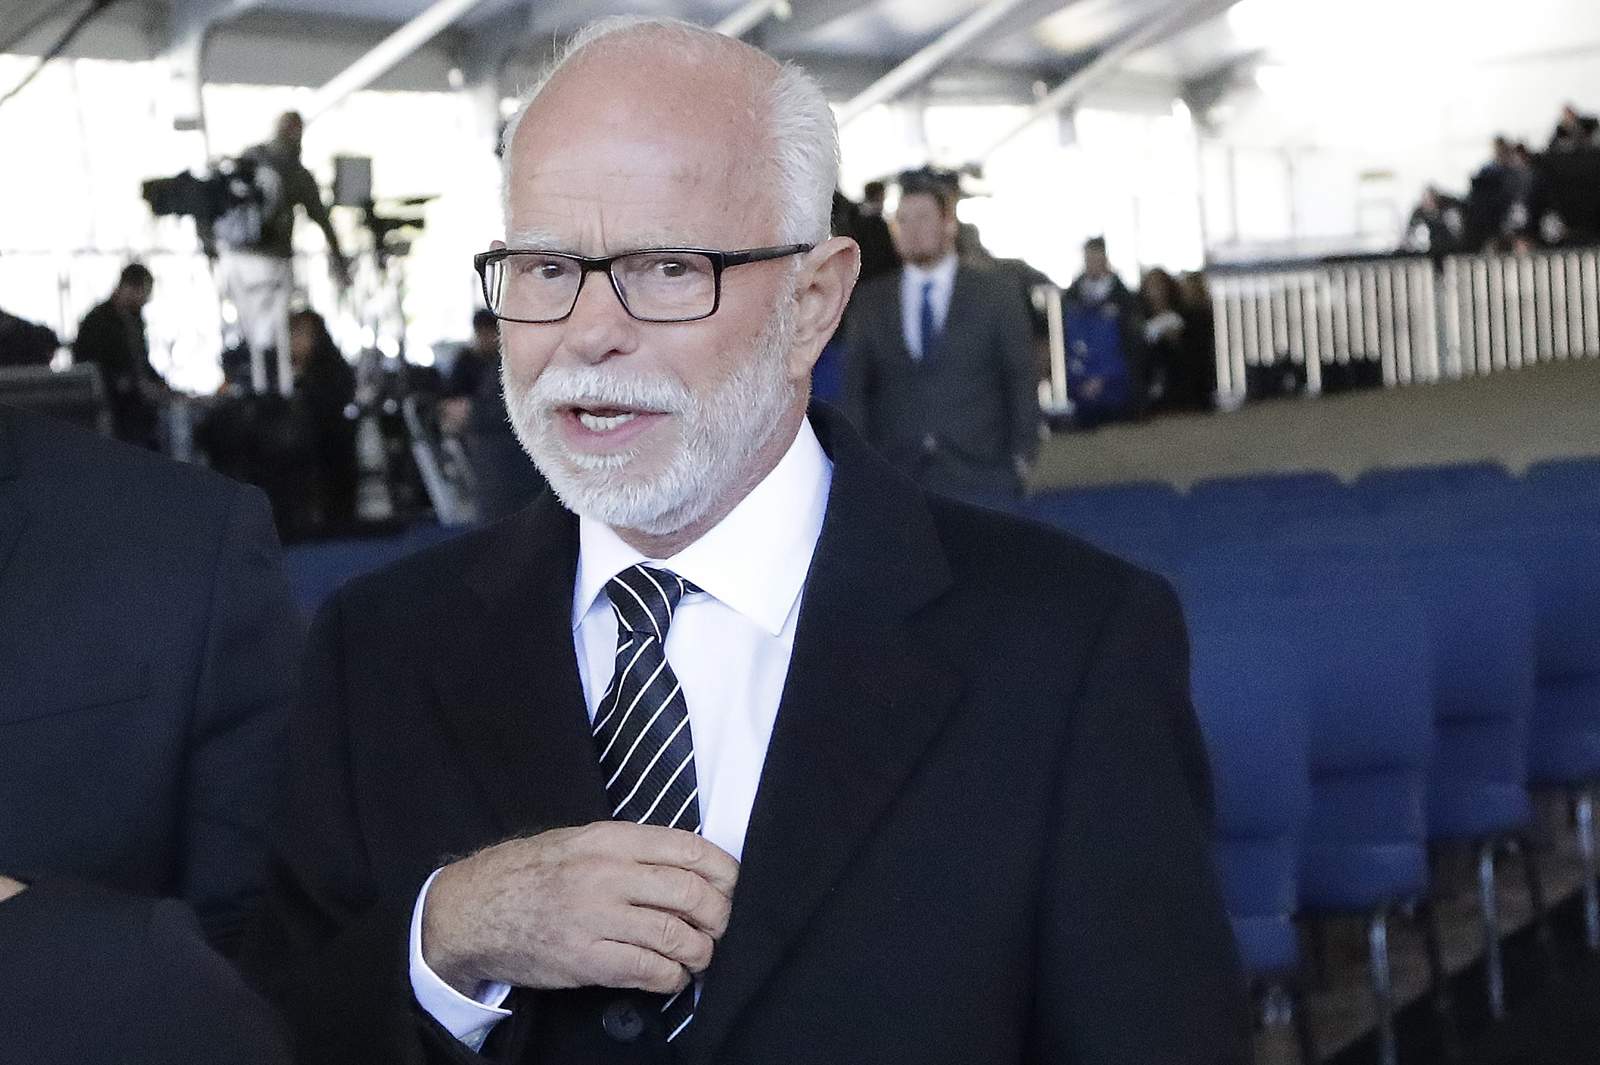 Jim Bakker gets PPP loans during legal fight on fraud claims